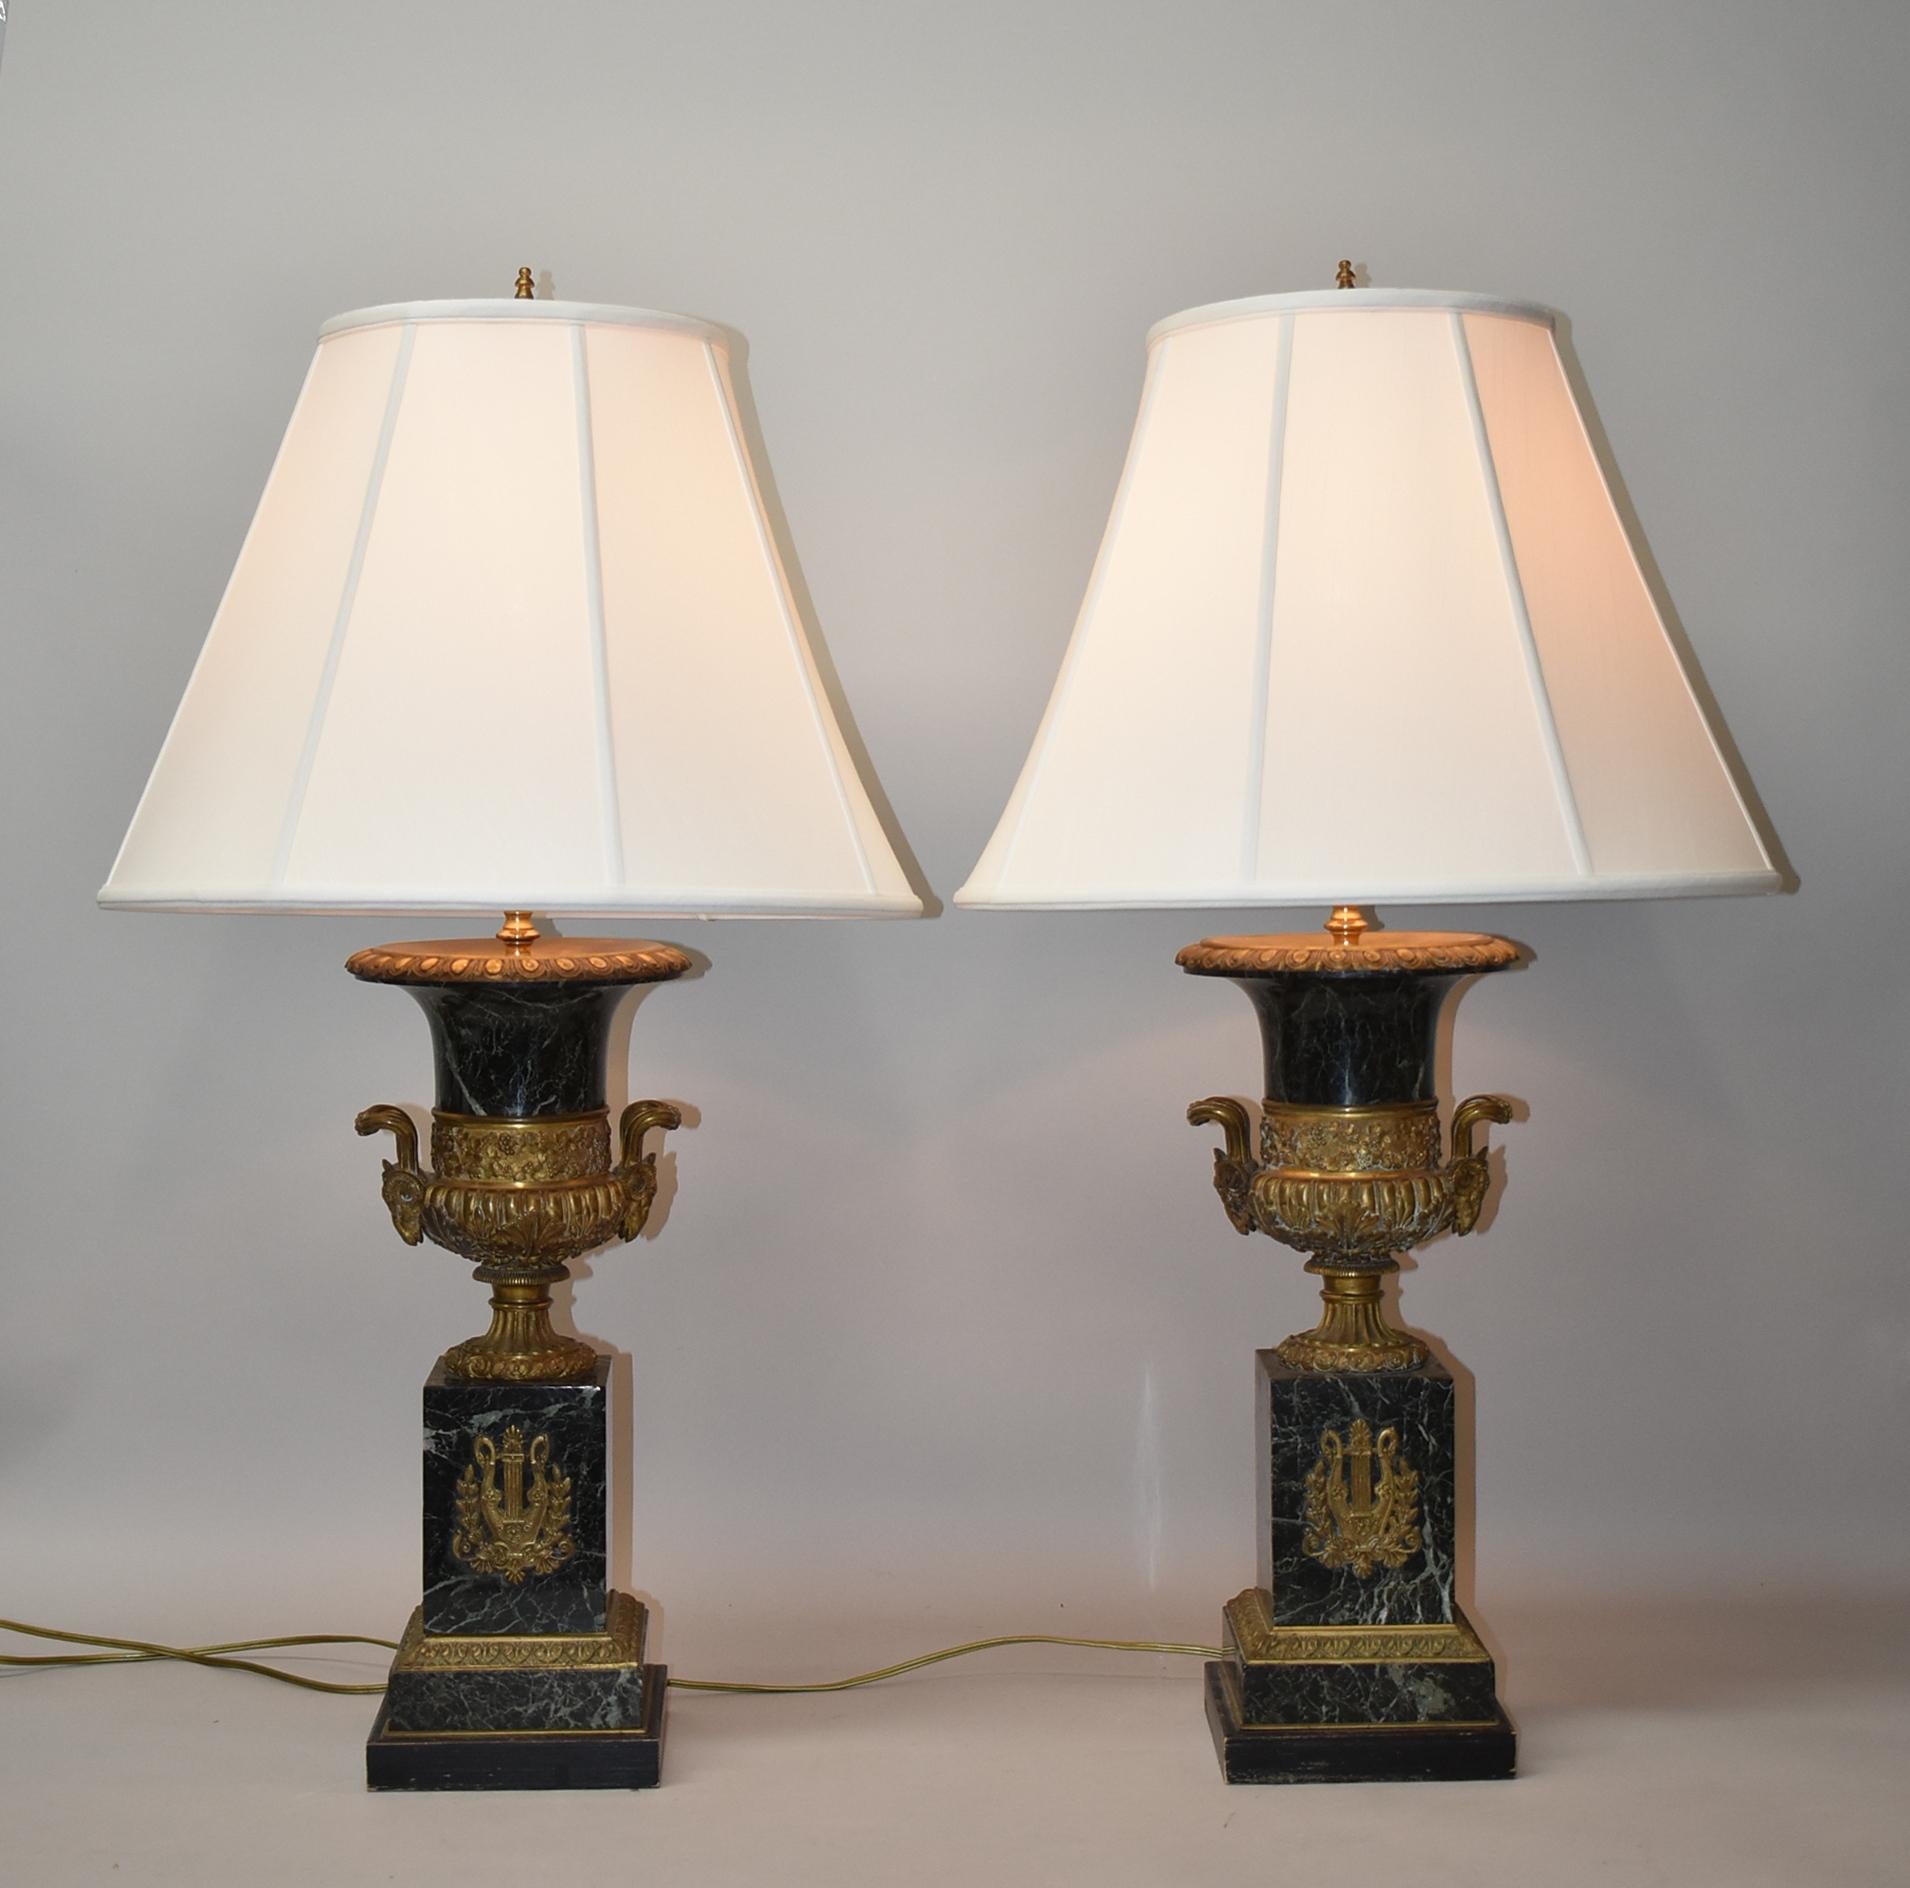 Pair of French Empire style single socket table lamps. Urn shape base with applied figural ram head handles on either side. Bronze lute and swan details in the center. Across the top is a relief border with a grapevine pattern.